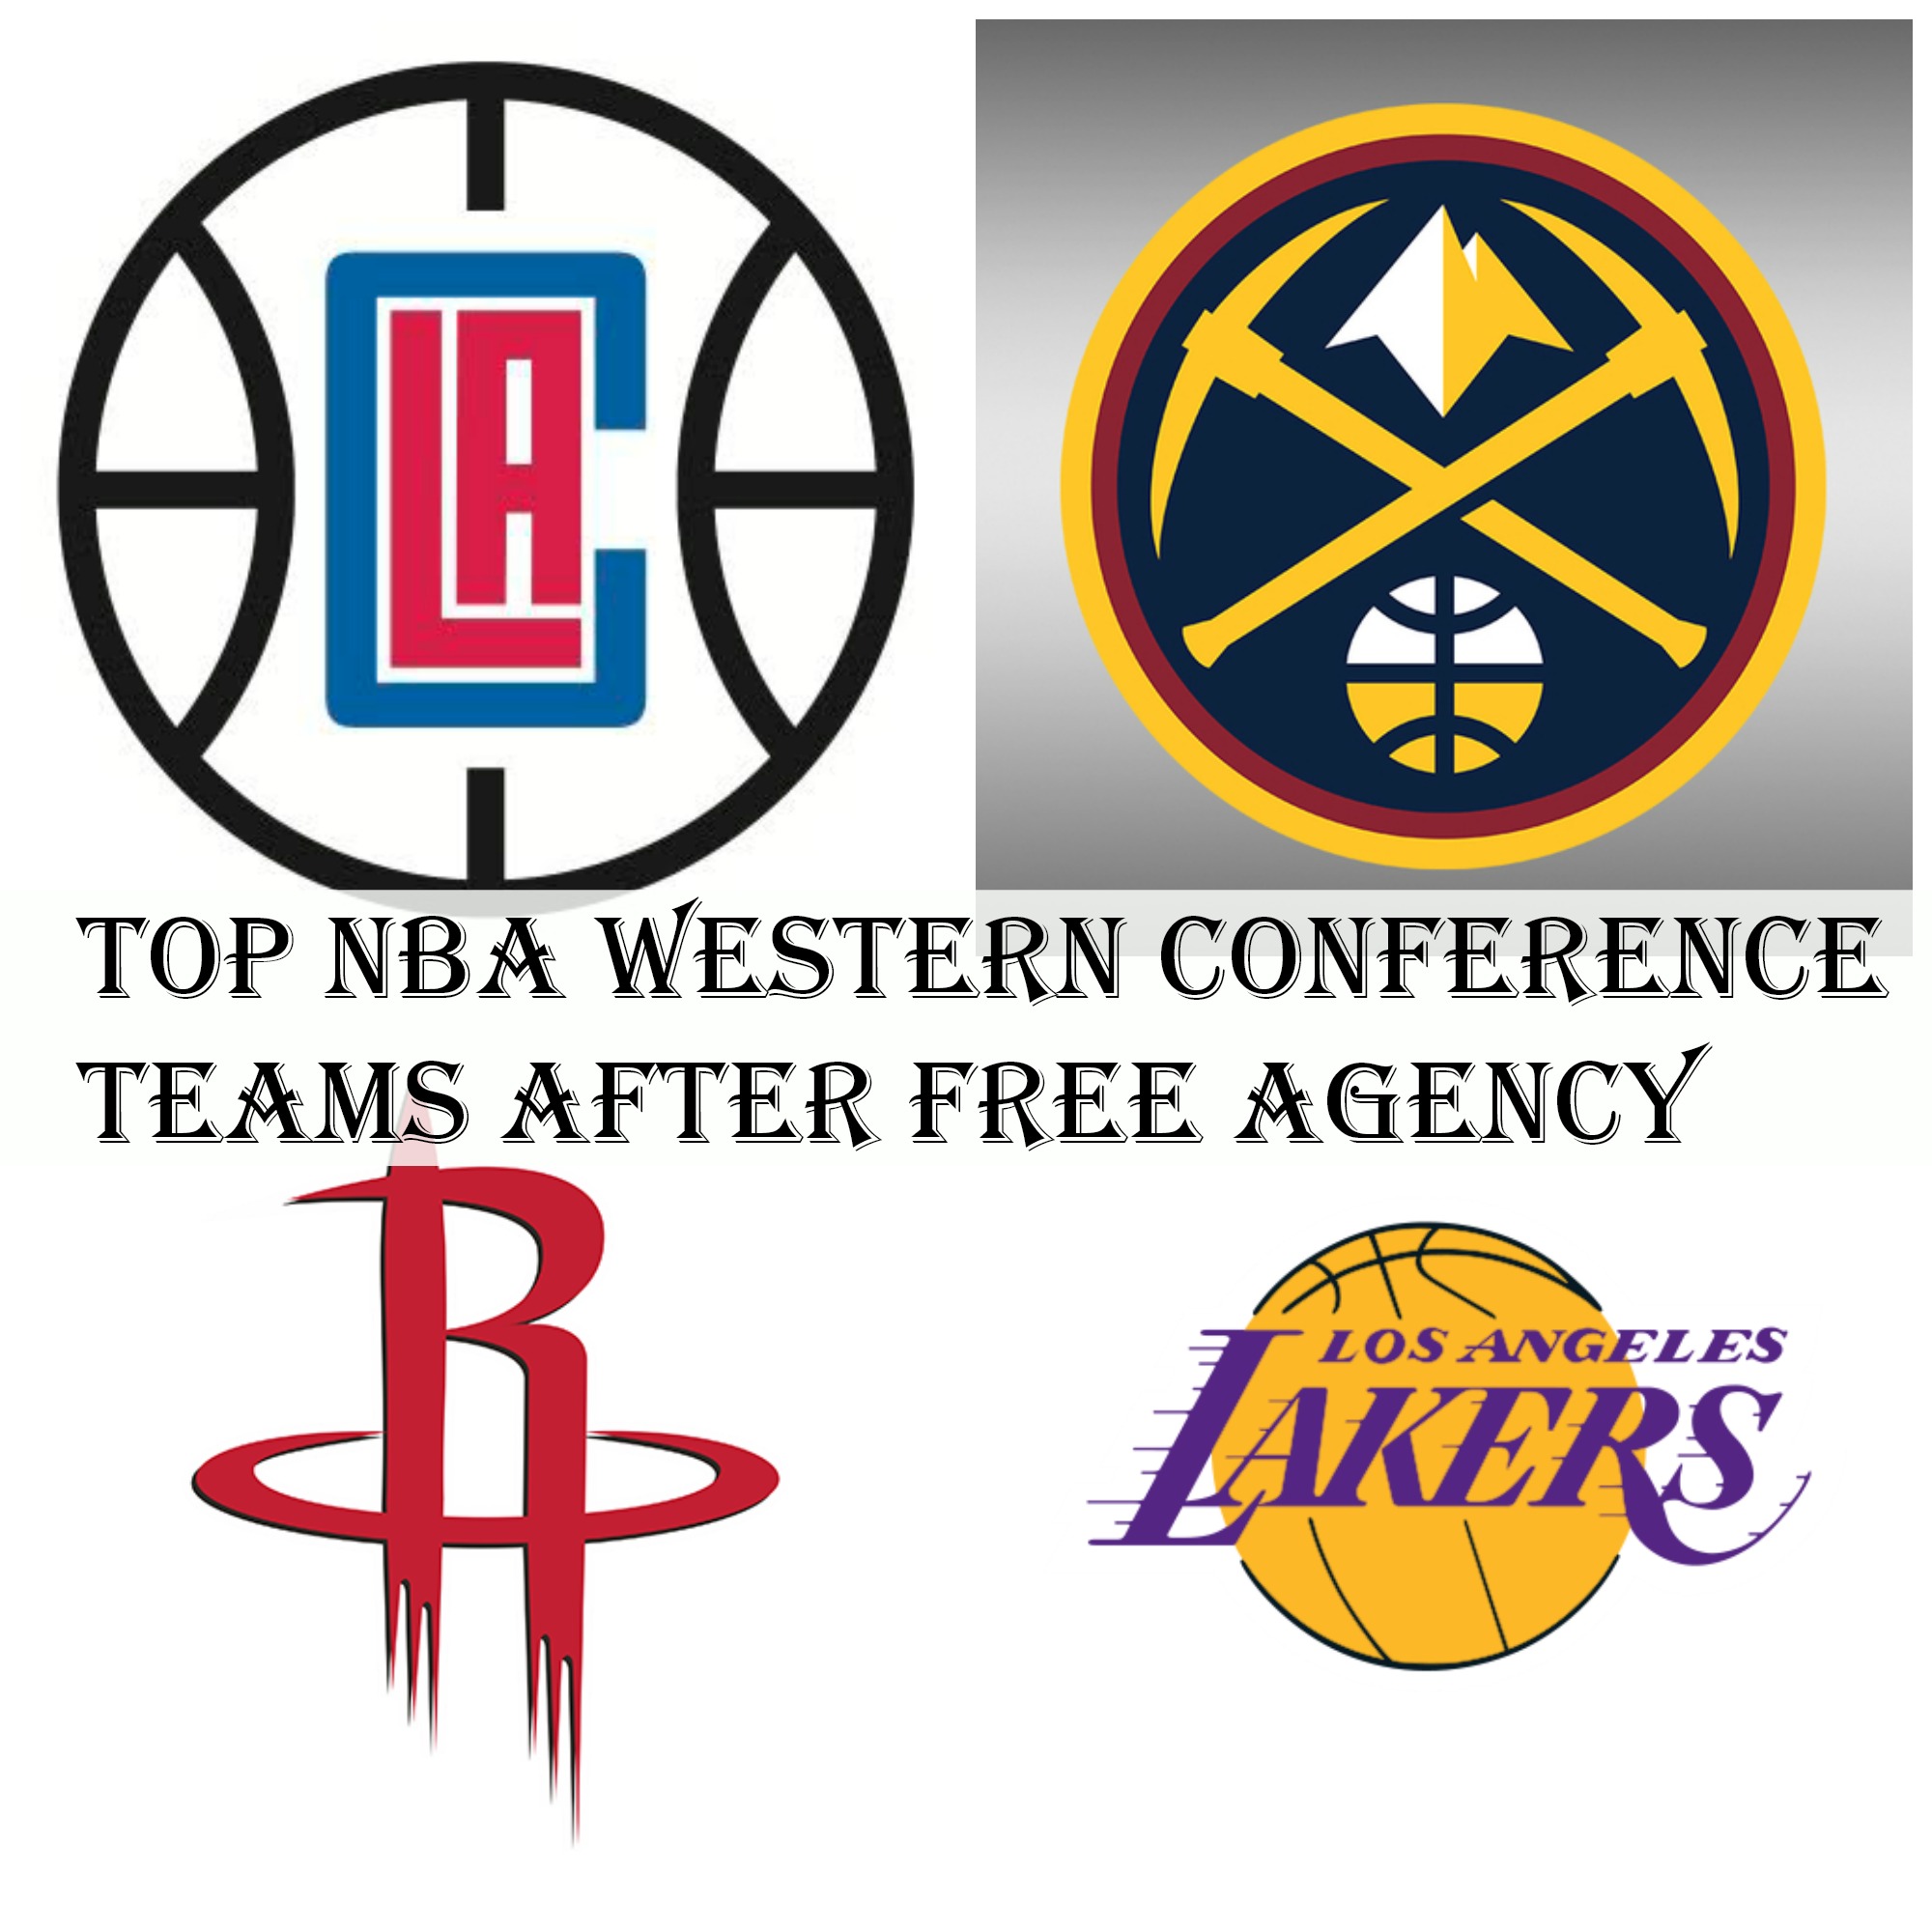 east and west conference nba